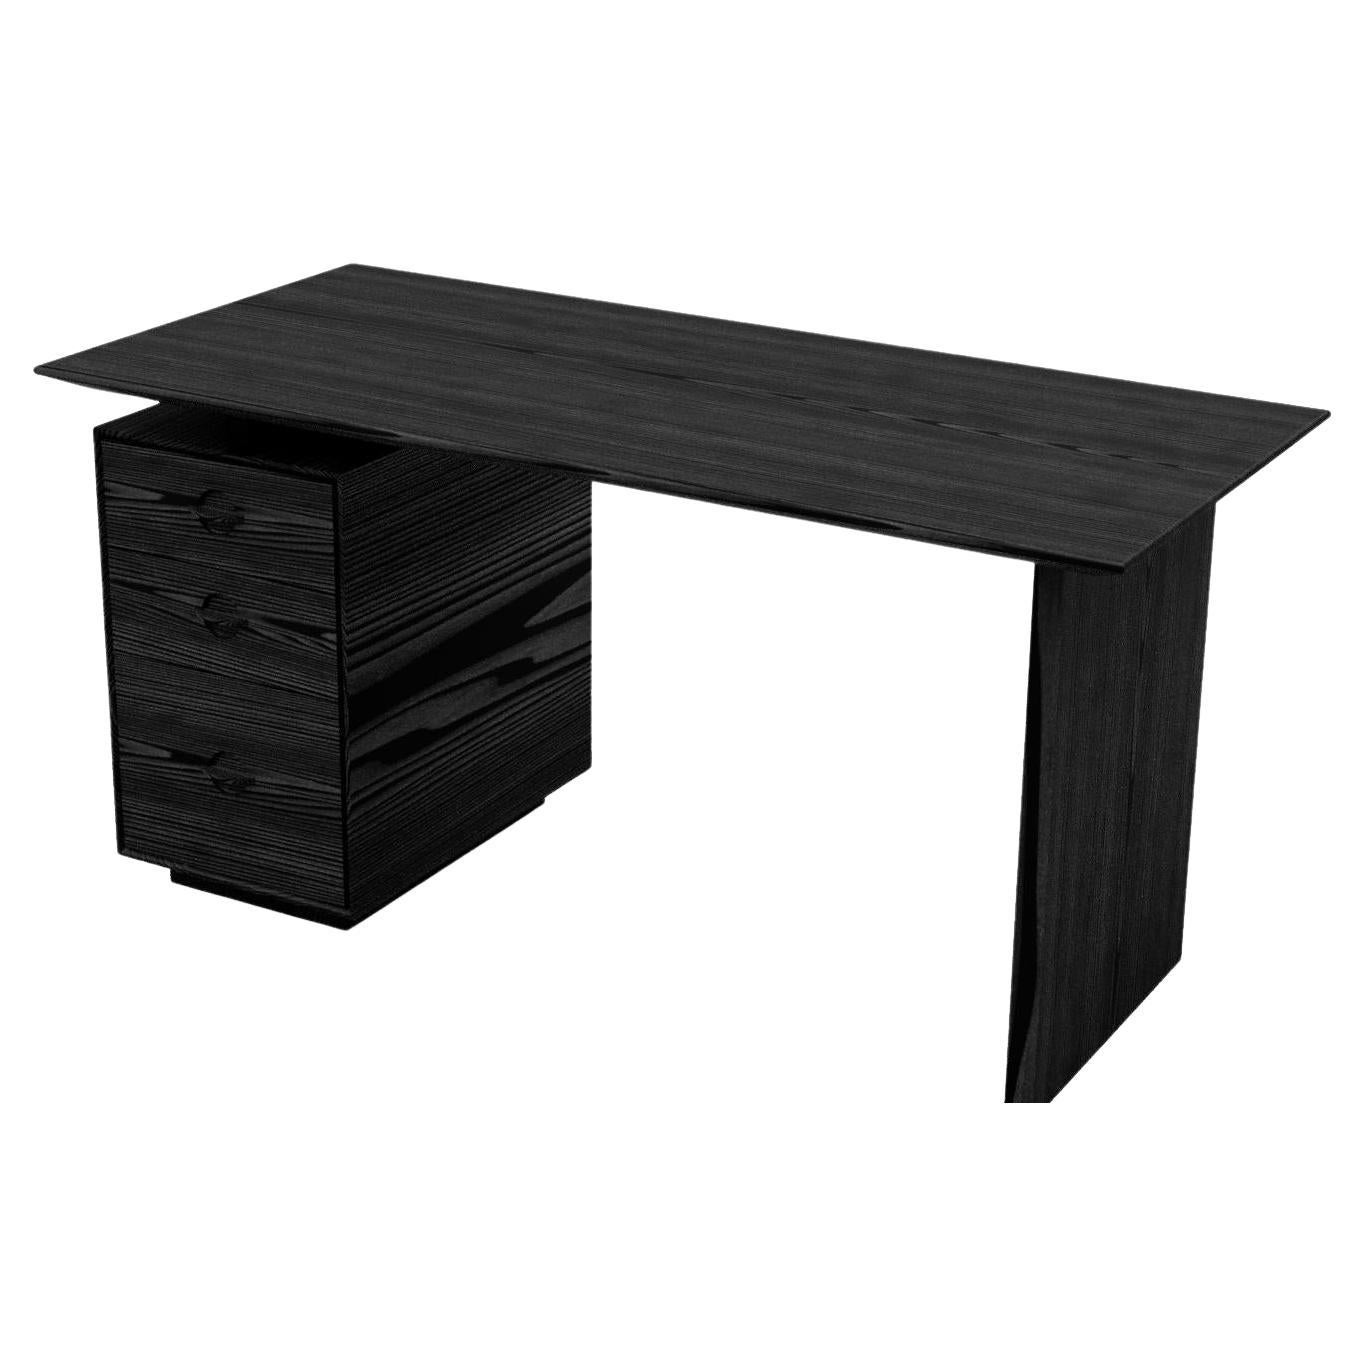 Modern Ebonized Ash Odin Desk from the Signature Series by Pompous Fox